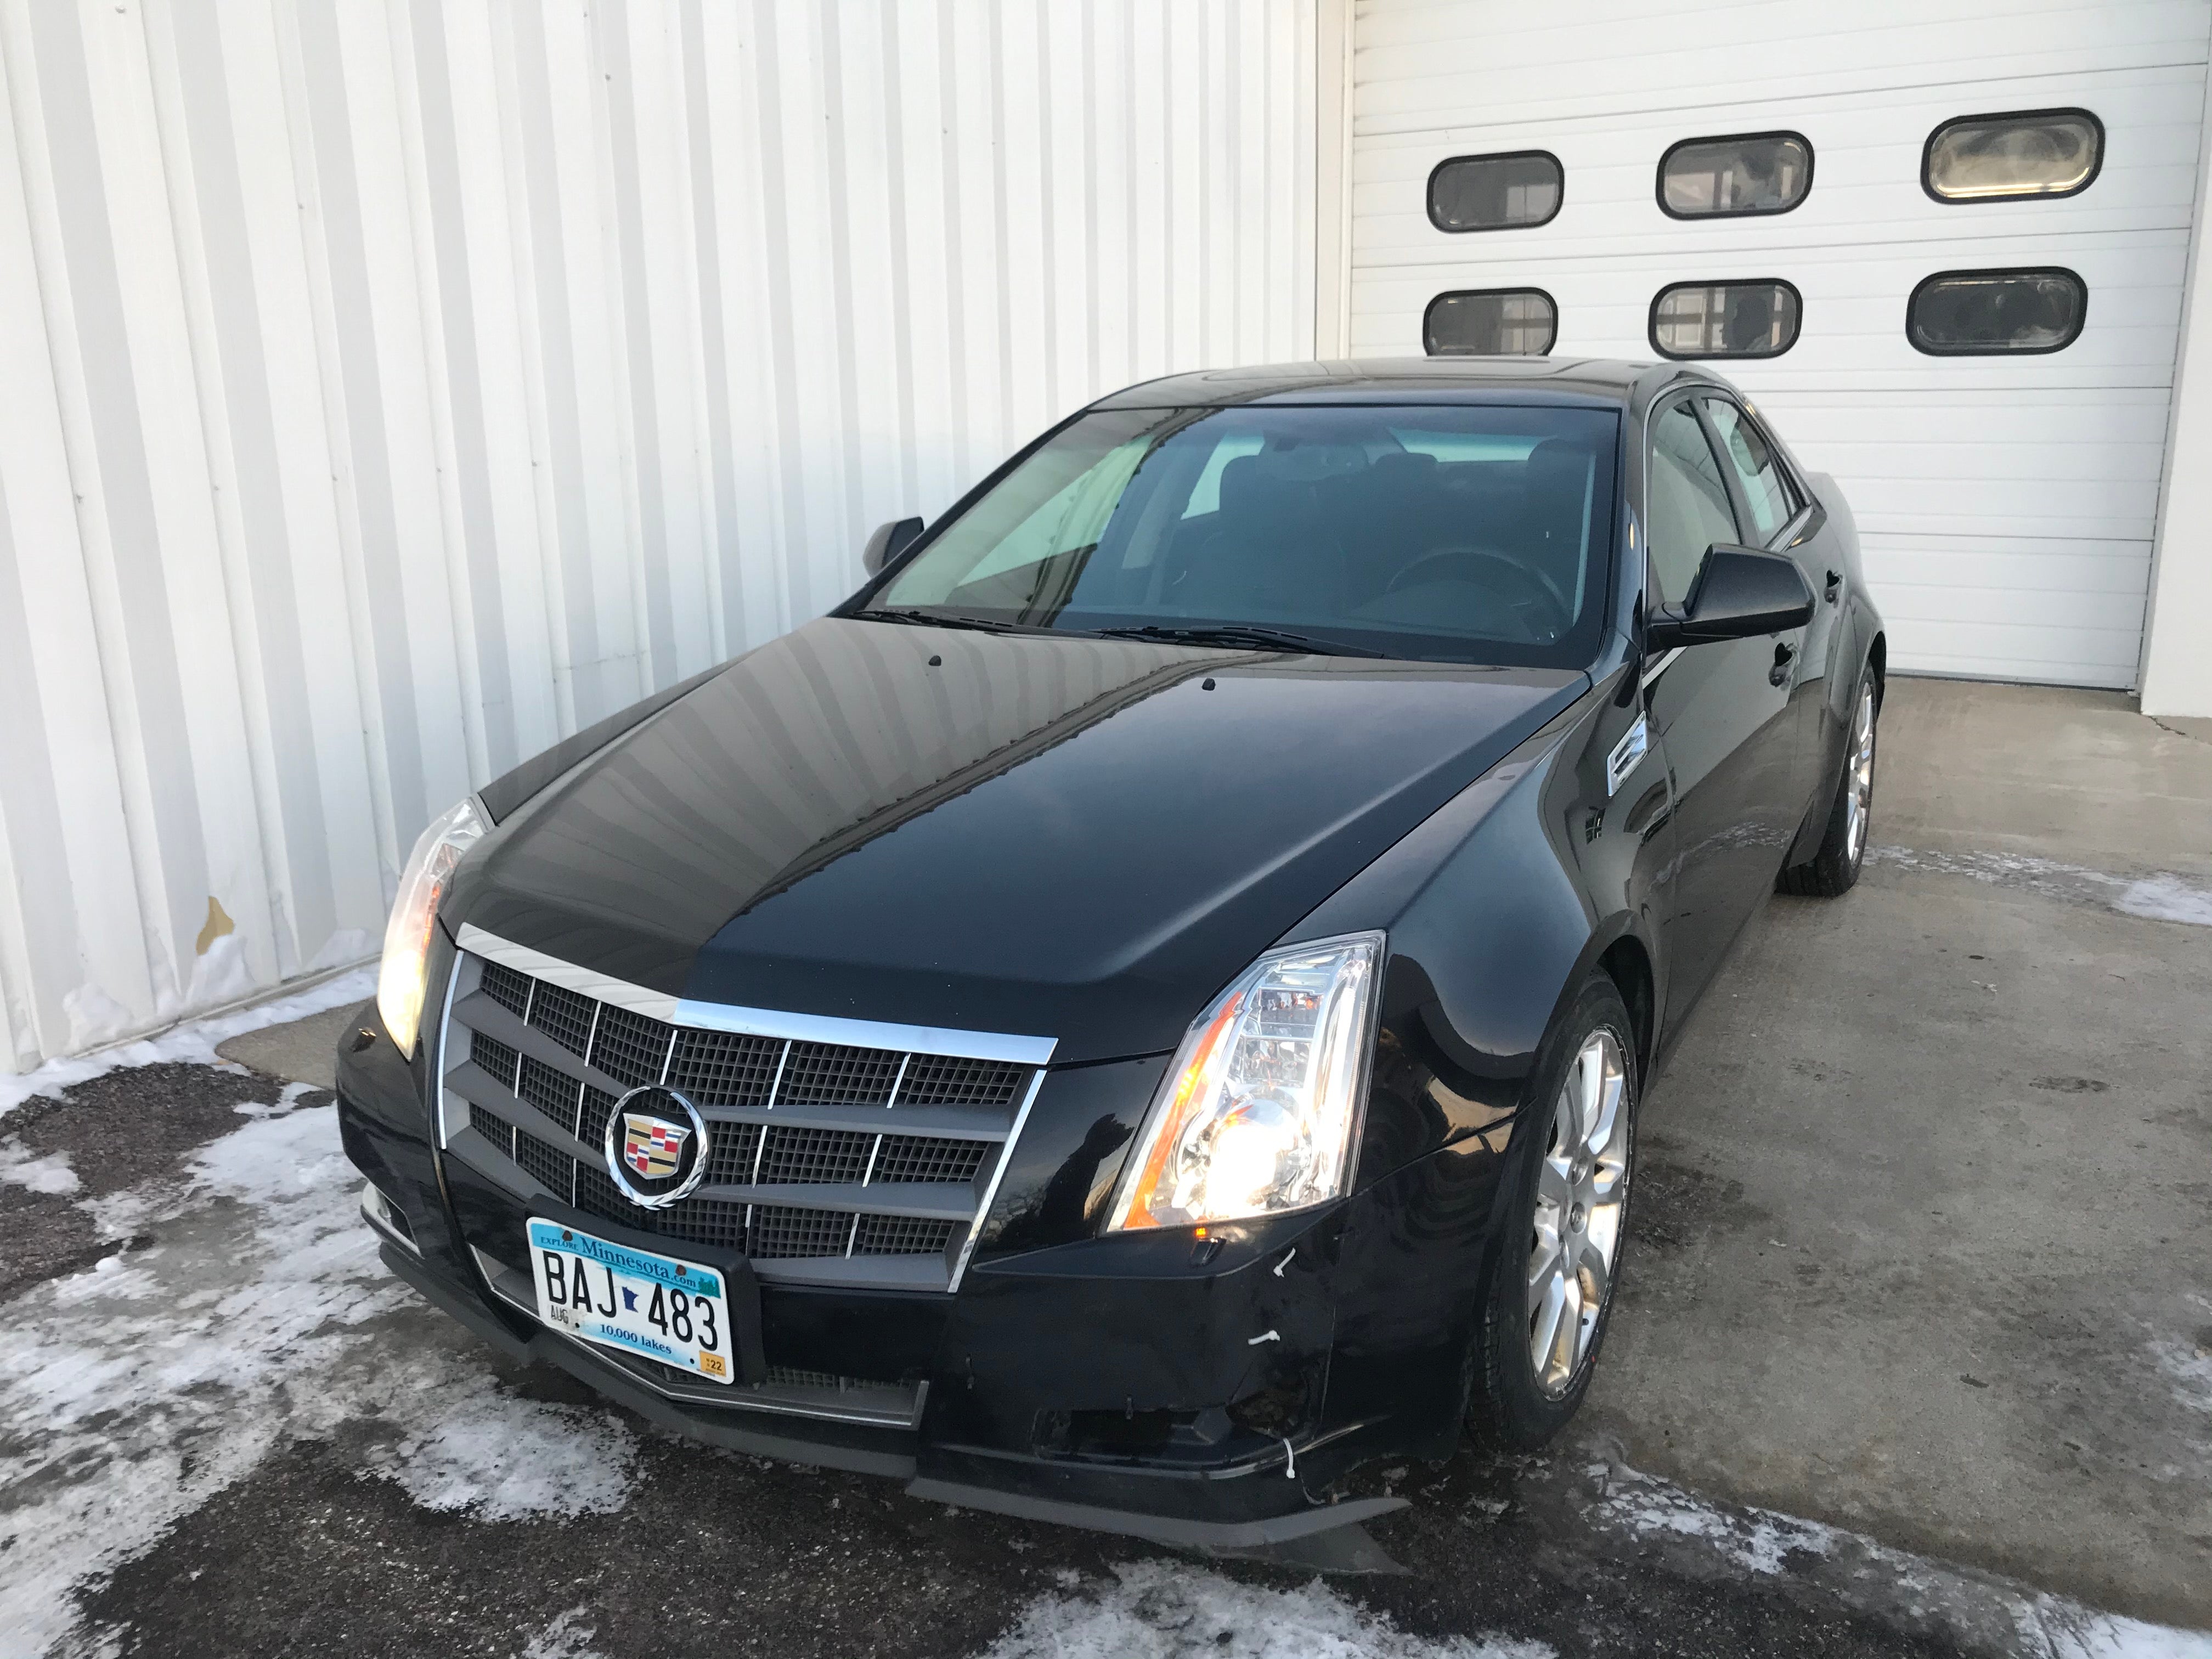 Used 2008 Cadillac CTS 3.6 with VIN 1G6DG577180159265 for sale in Arlington, Minnesota